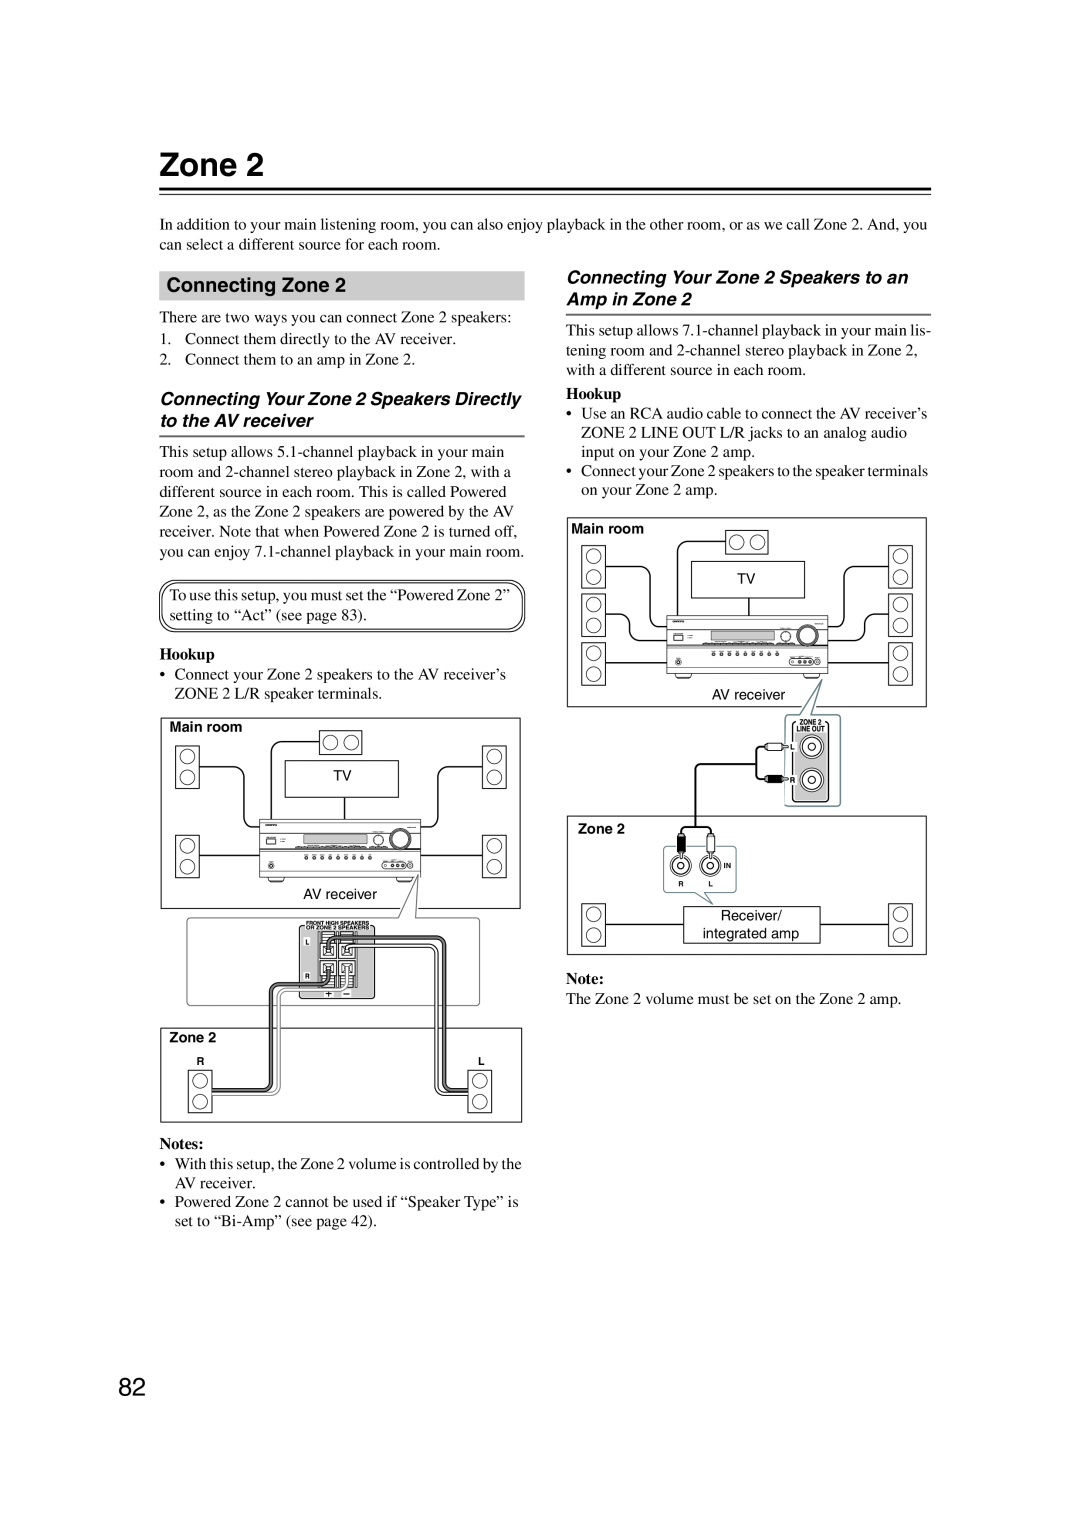 Onkyo HT-RC160 instruction manual Connecting Zone, Connecting Your Zone 2 Speakers to an Amp in Zone, Hookup, Notes 